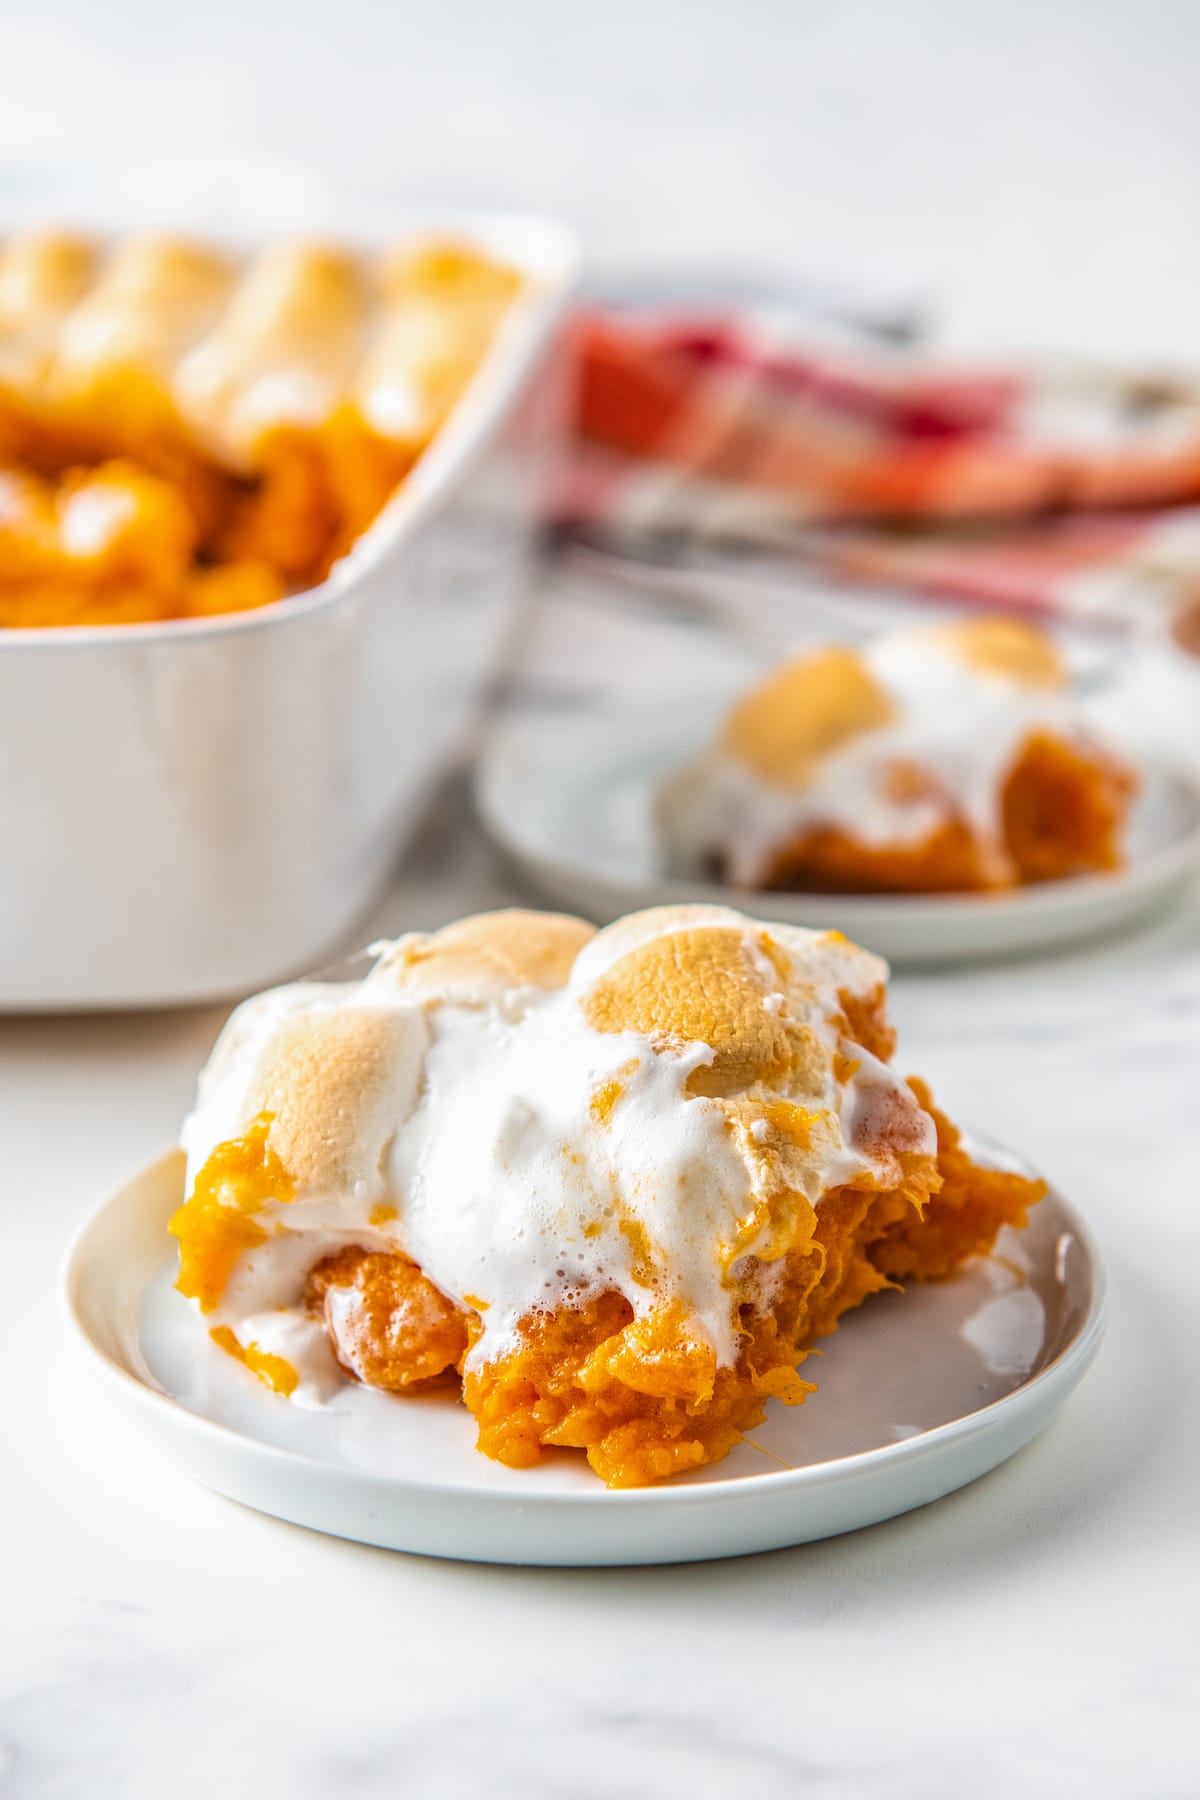 a portion of sweet potato casserole with marshmallows on a plate